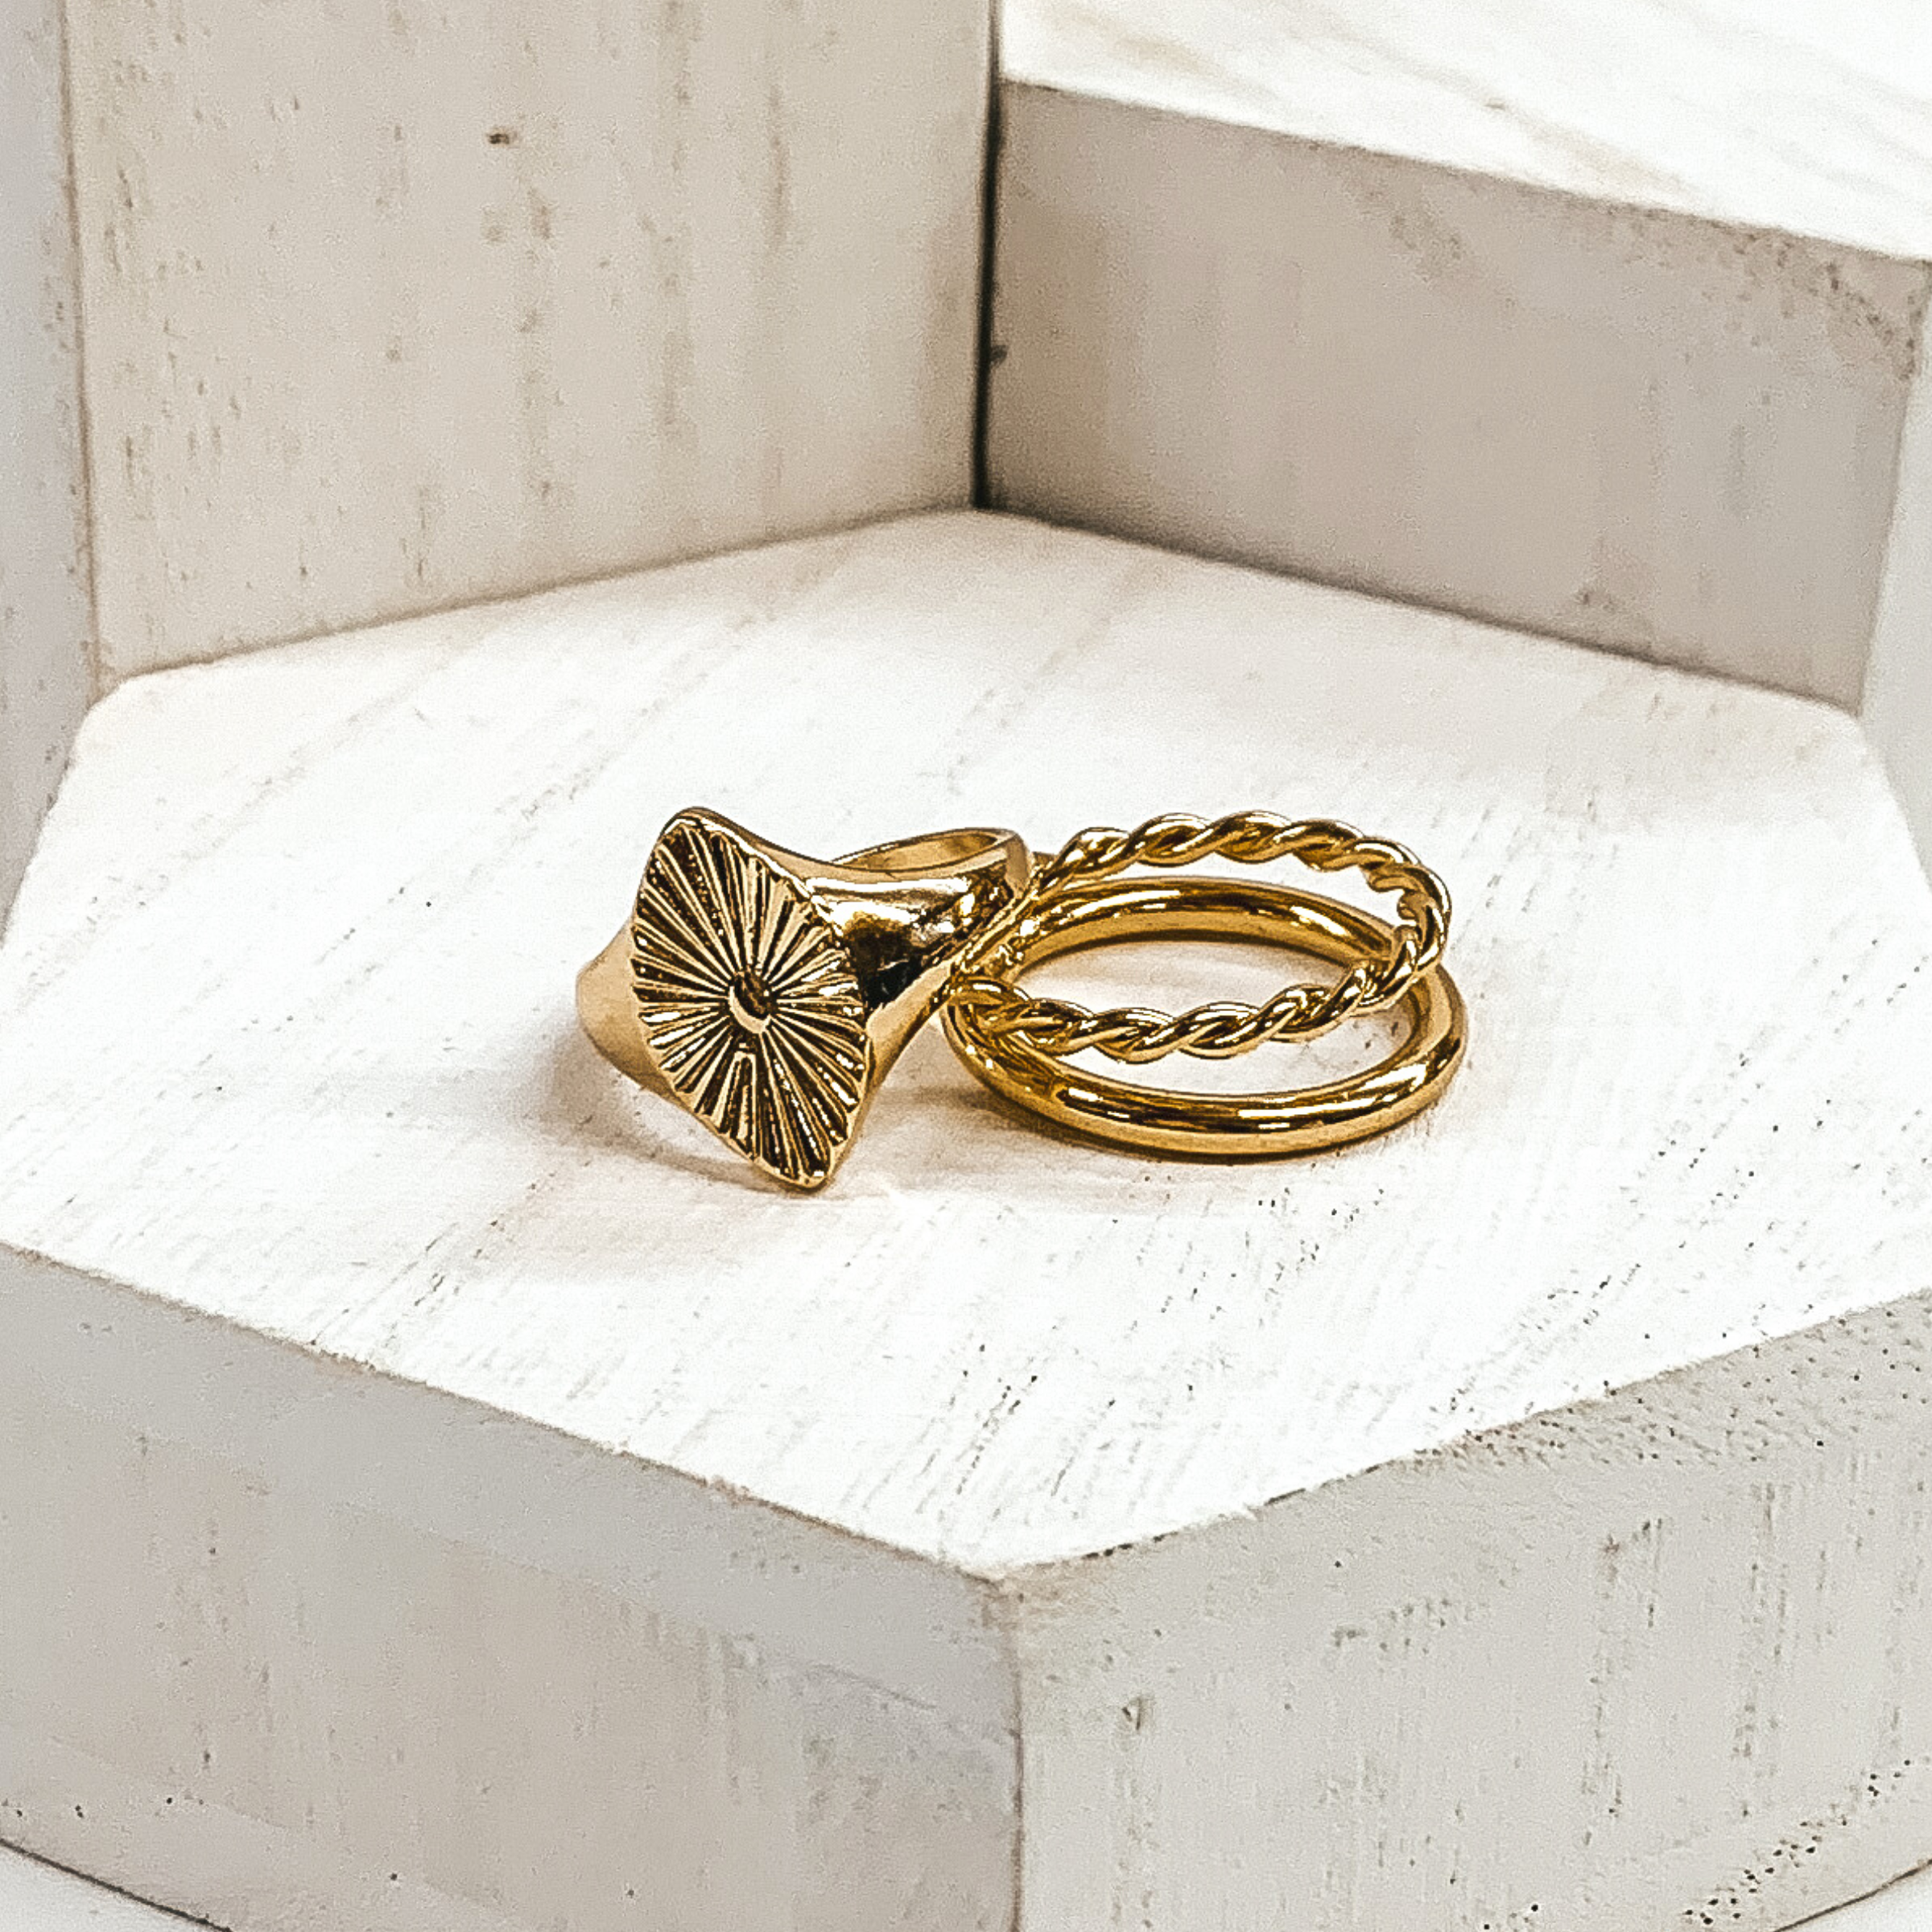 One ring has a marquis shaped pendant with a sunburst design. This ring is laying on a double stacked ring with a plain band connected to a twisted ring. These rings are pictured on white blocks. 